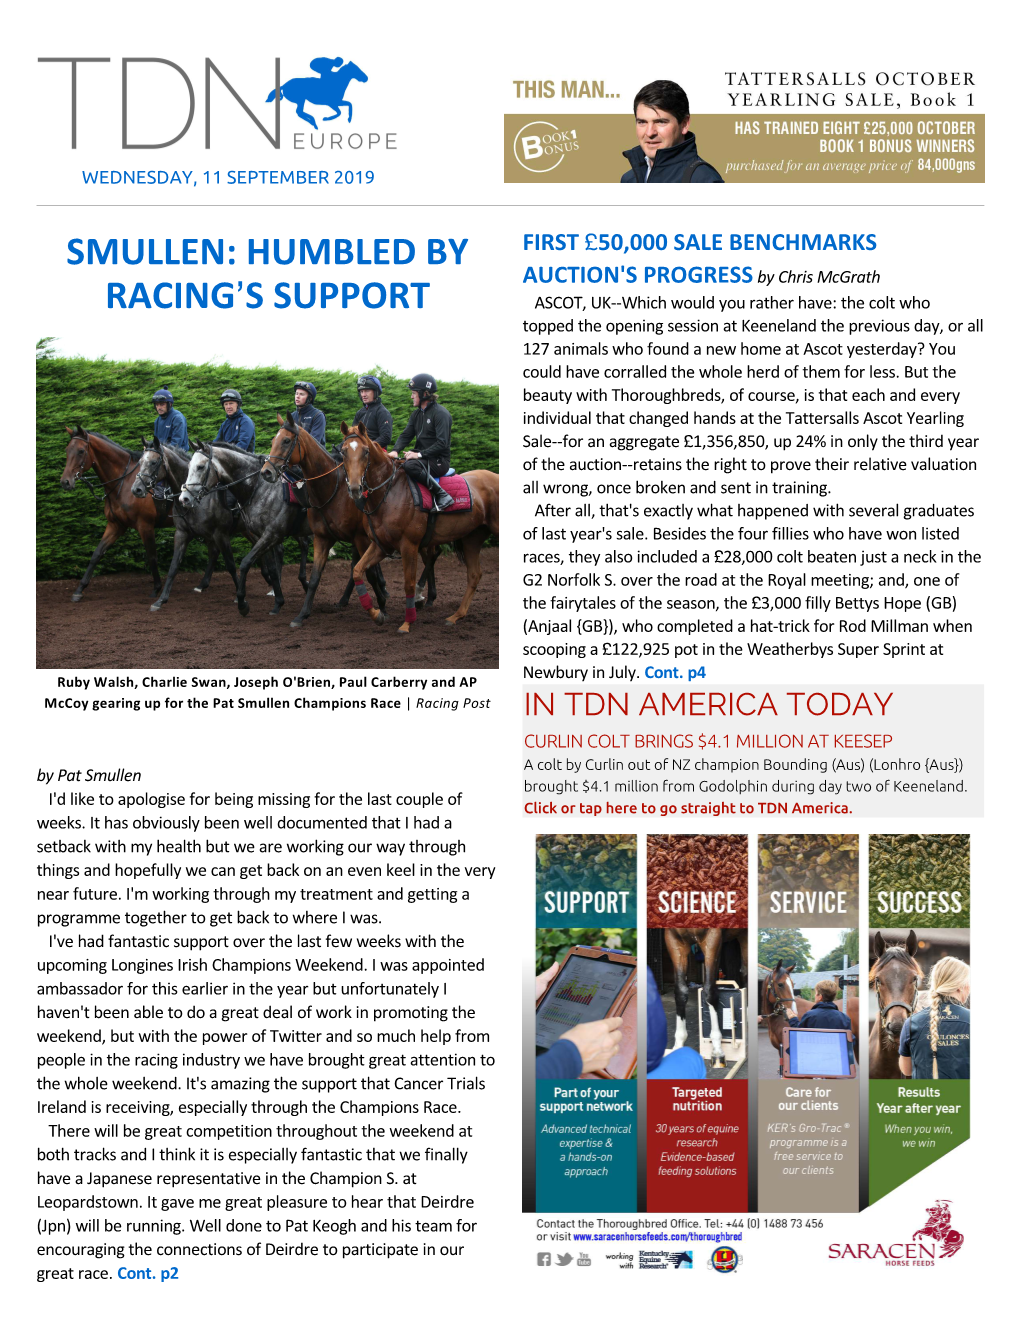 Smullen: Humbled by Racing=S Support